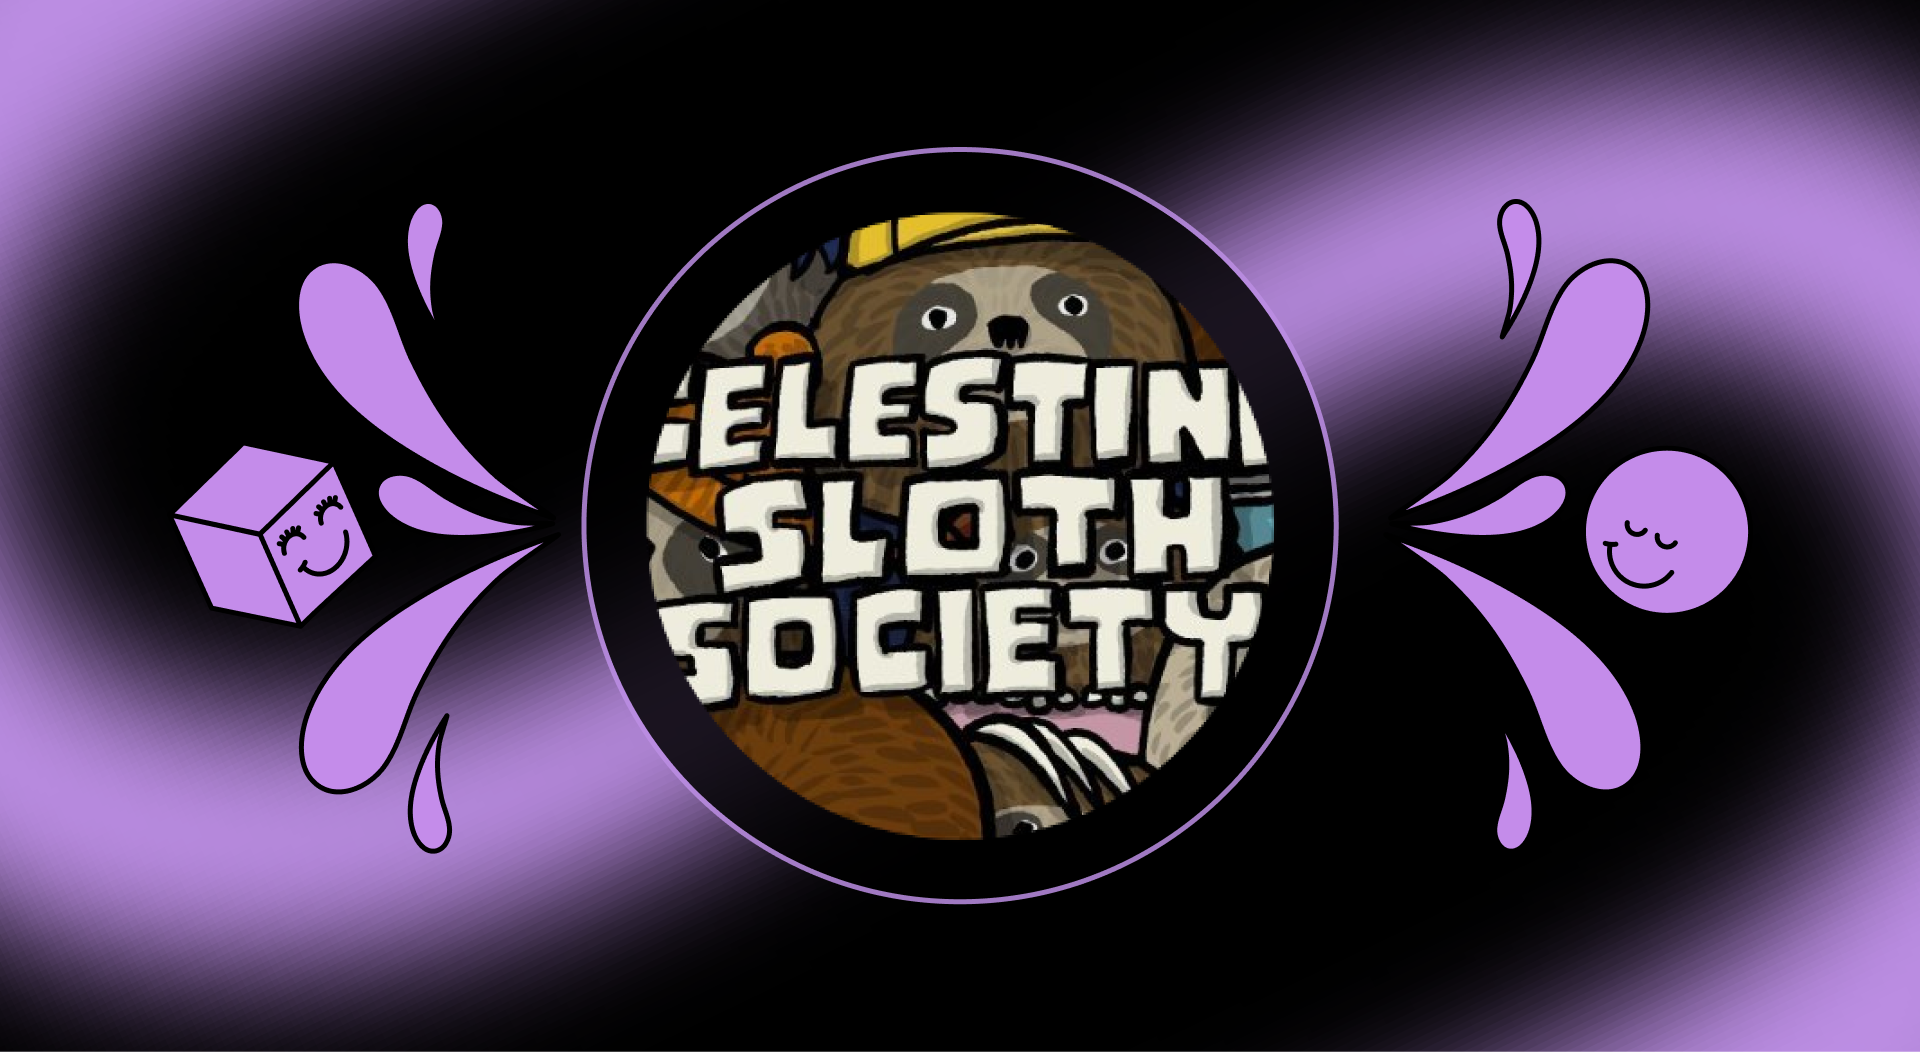 How to buy Celestine Sloths from any chain